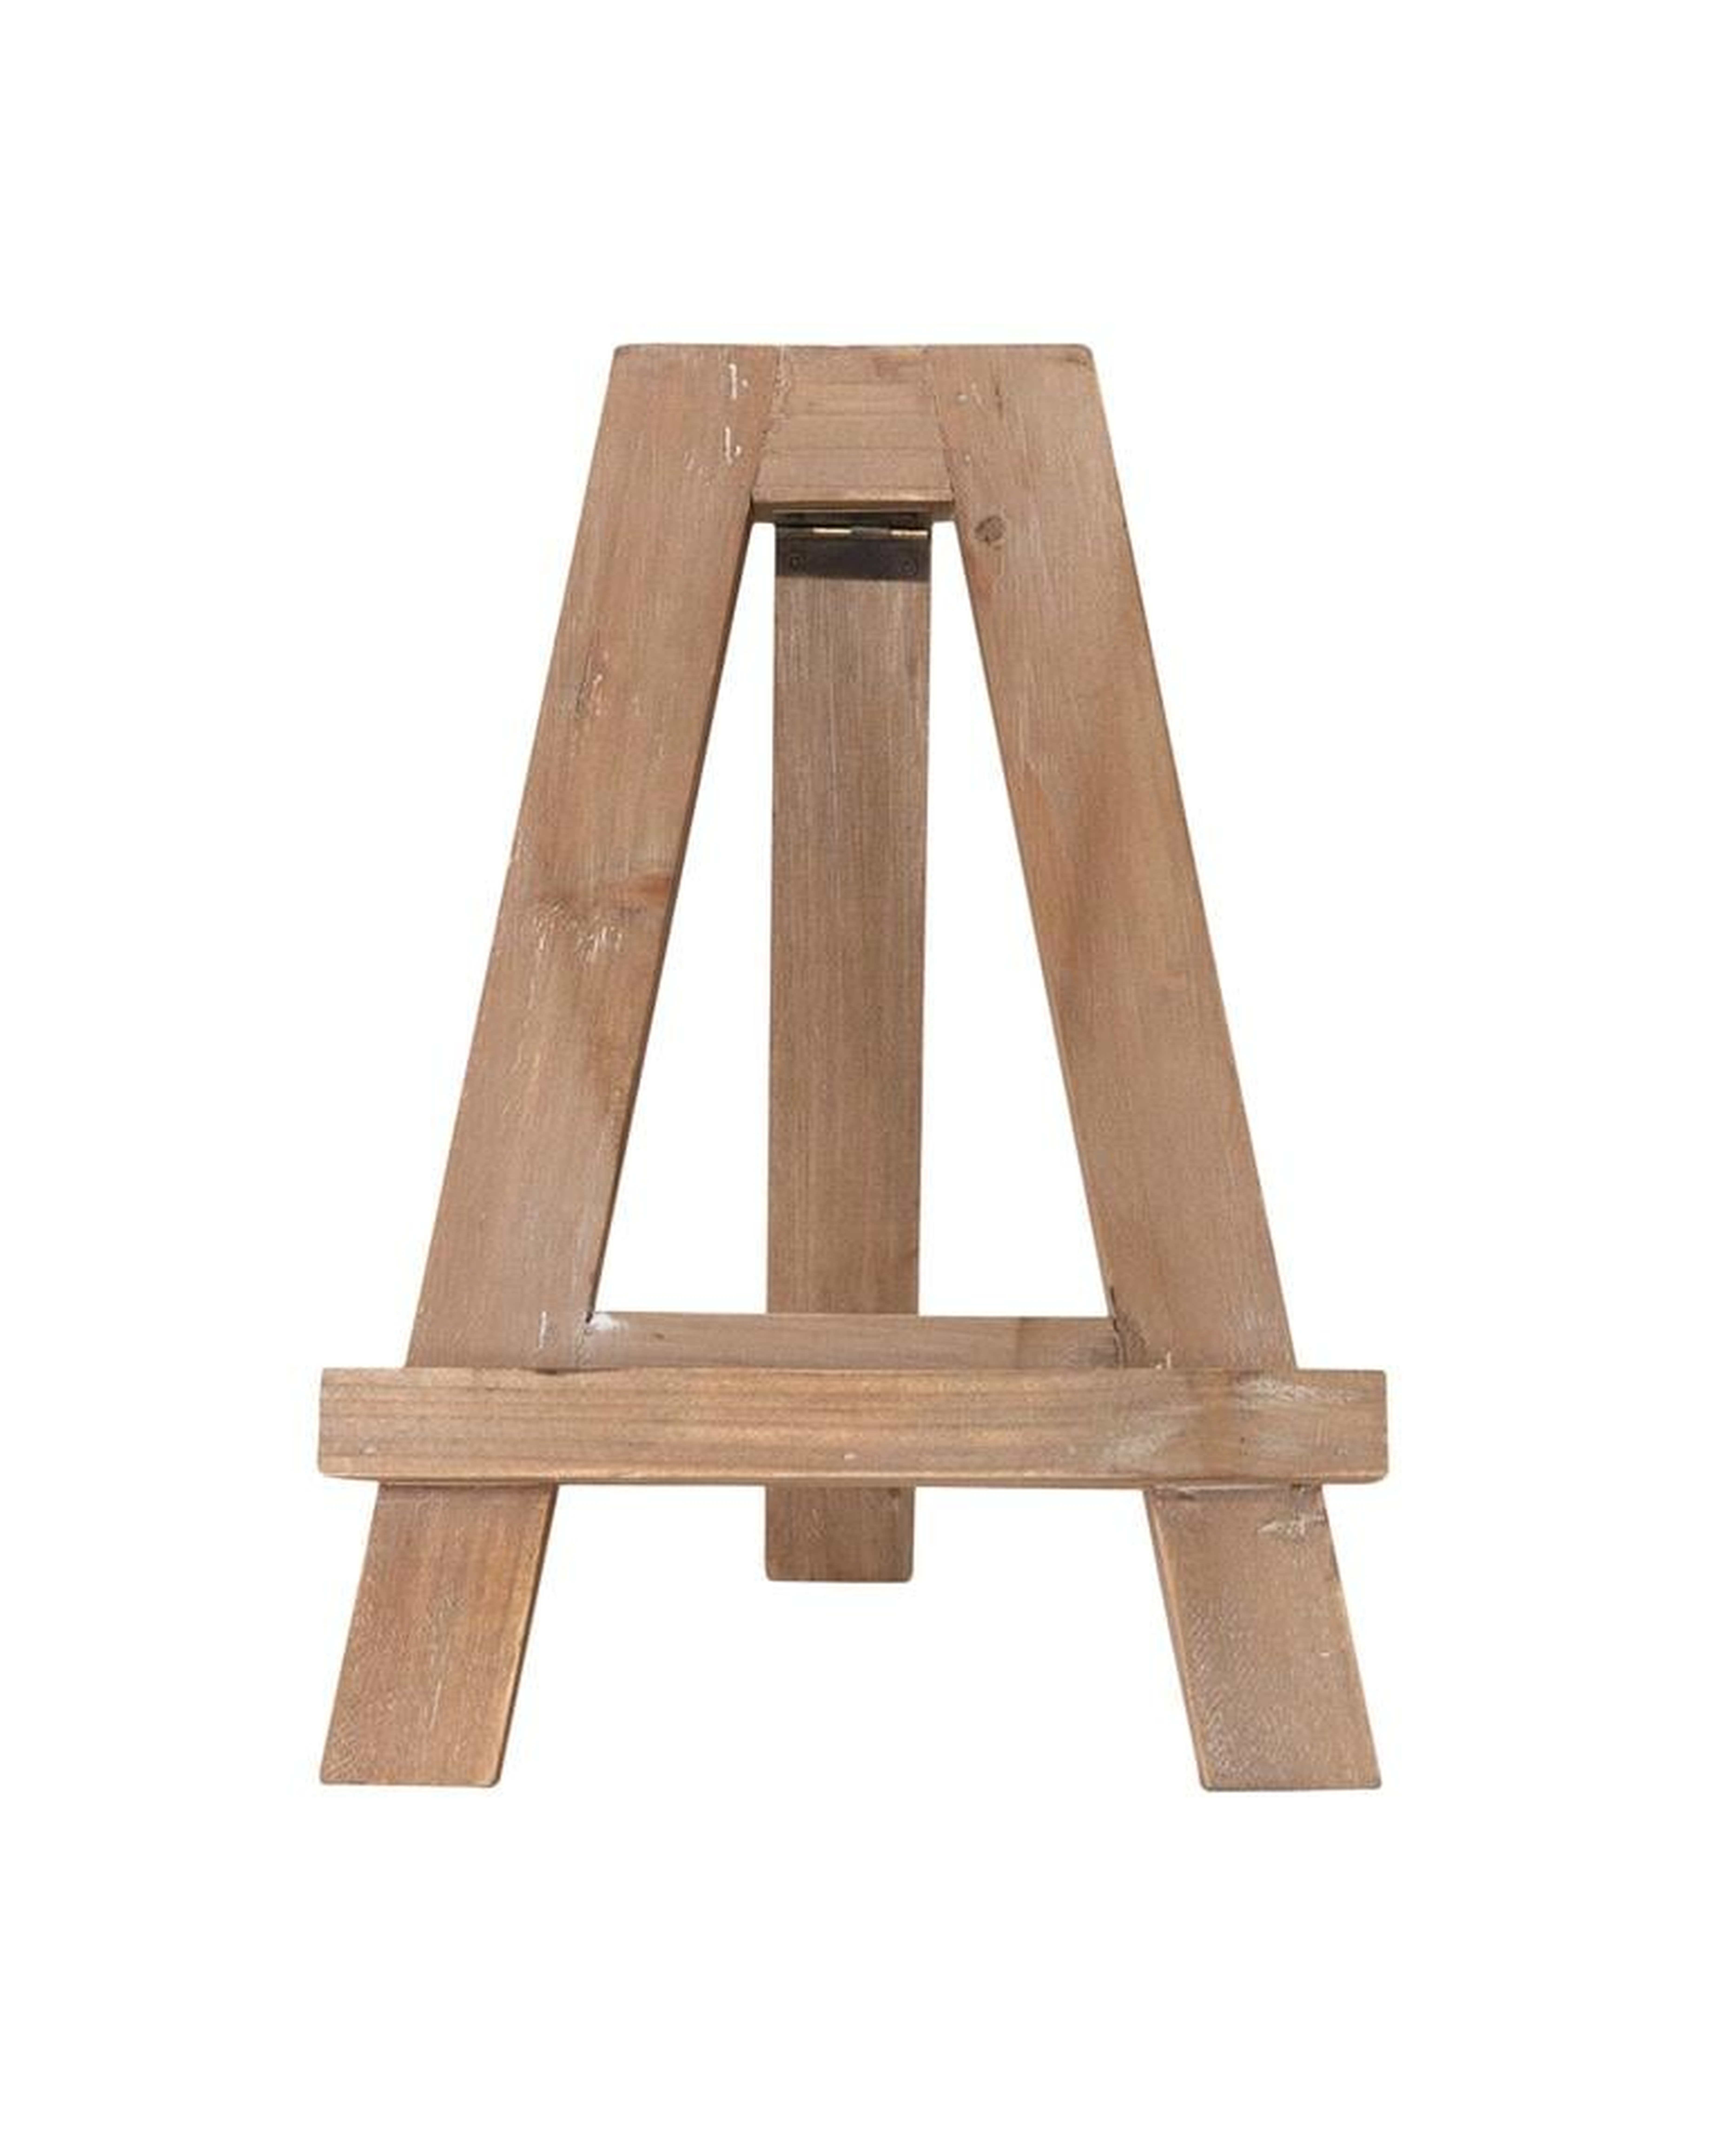 WOODEN EASEL OBJECT - McGee & Co.